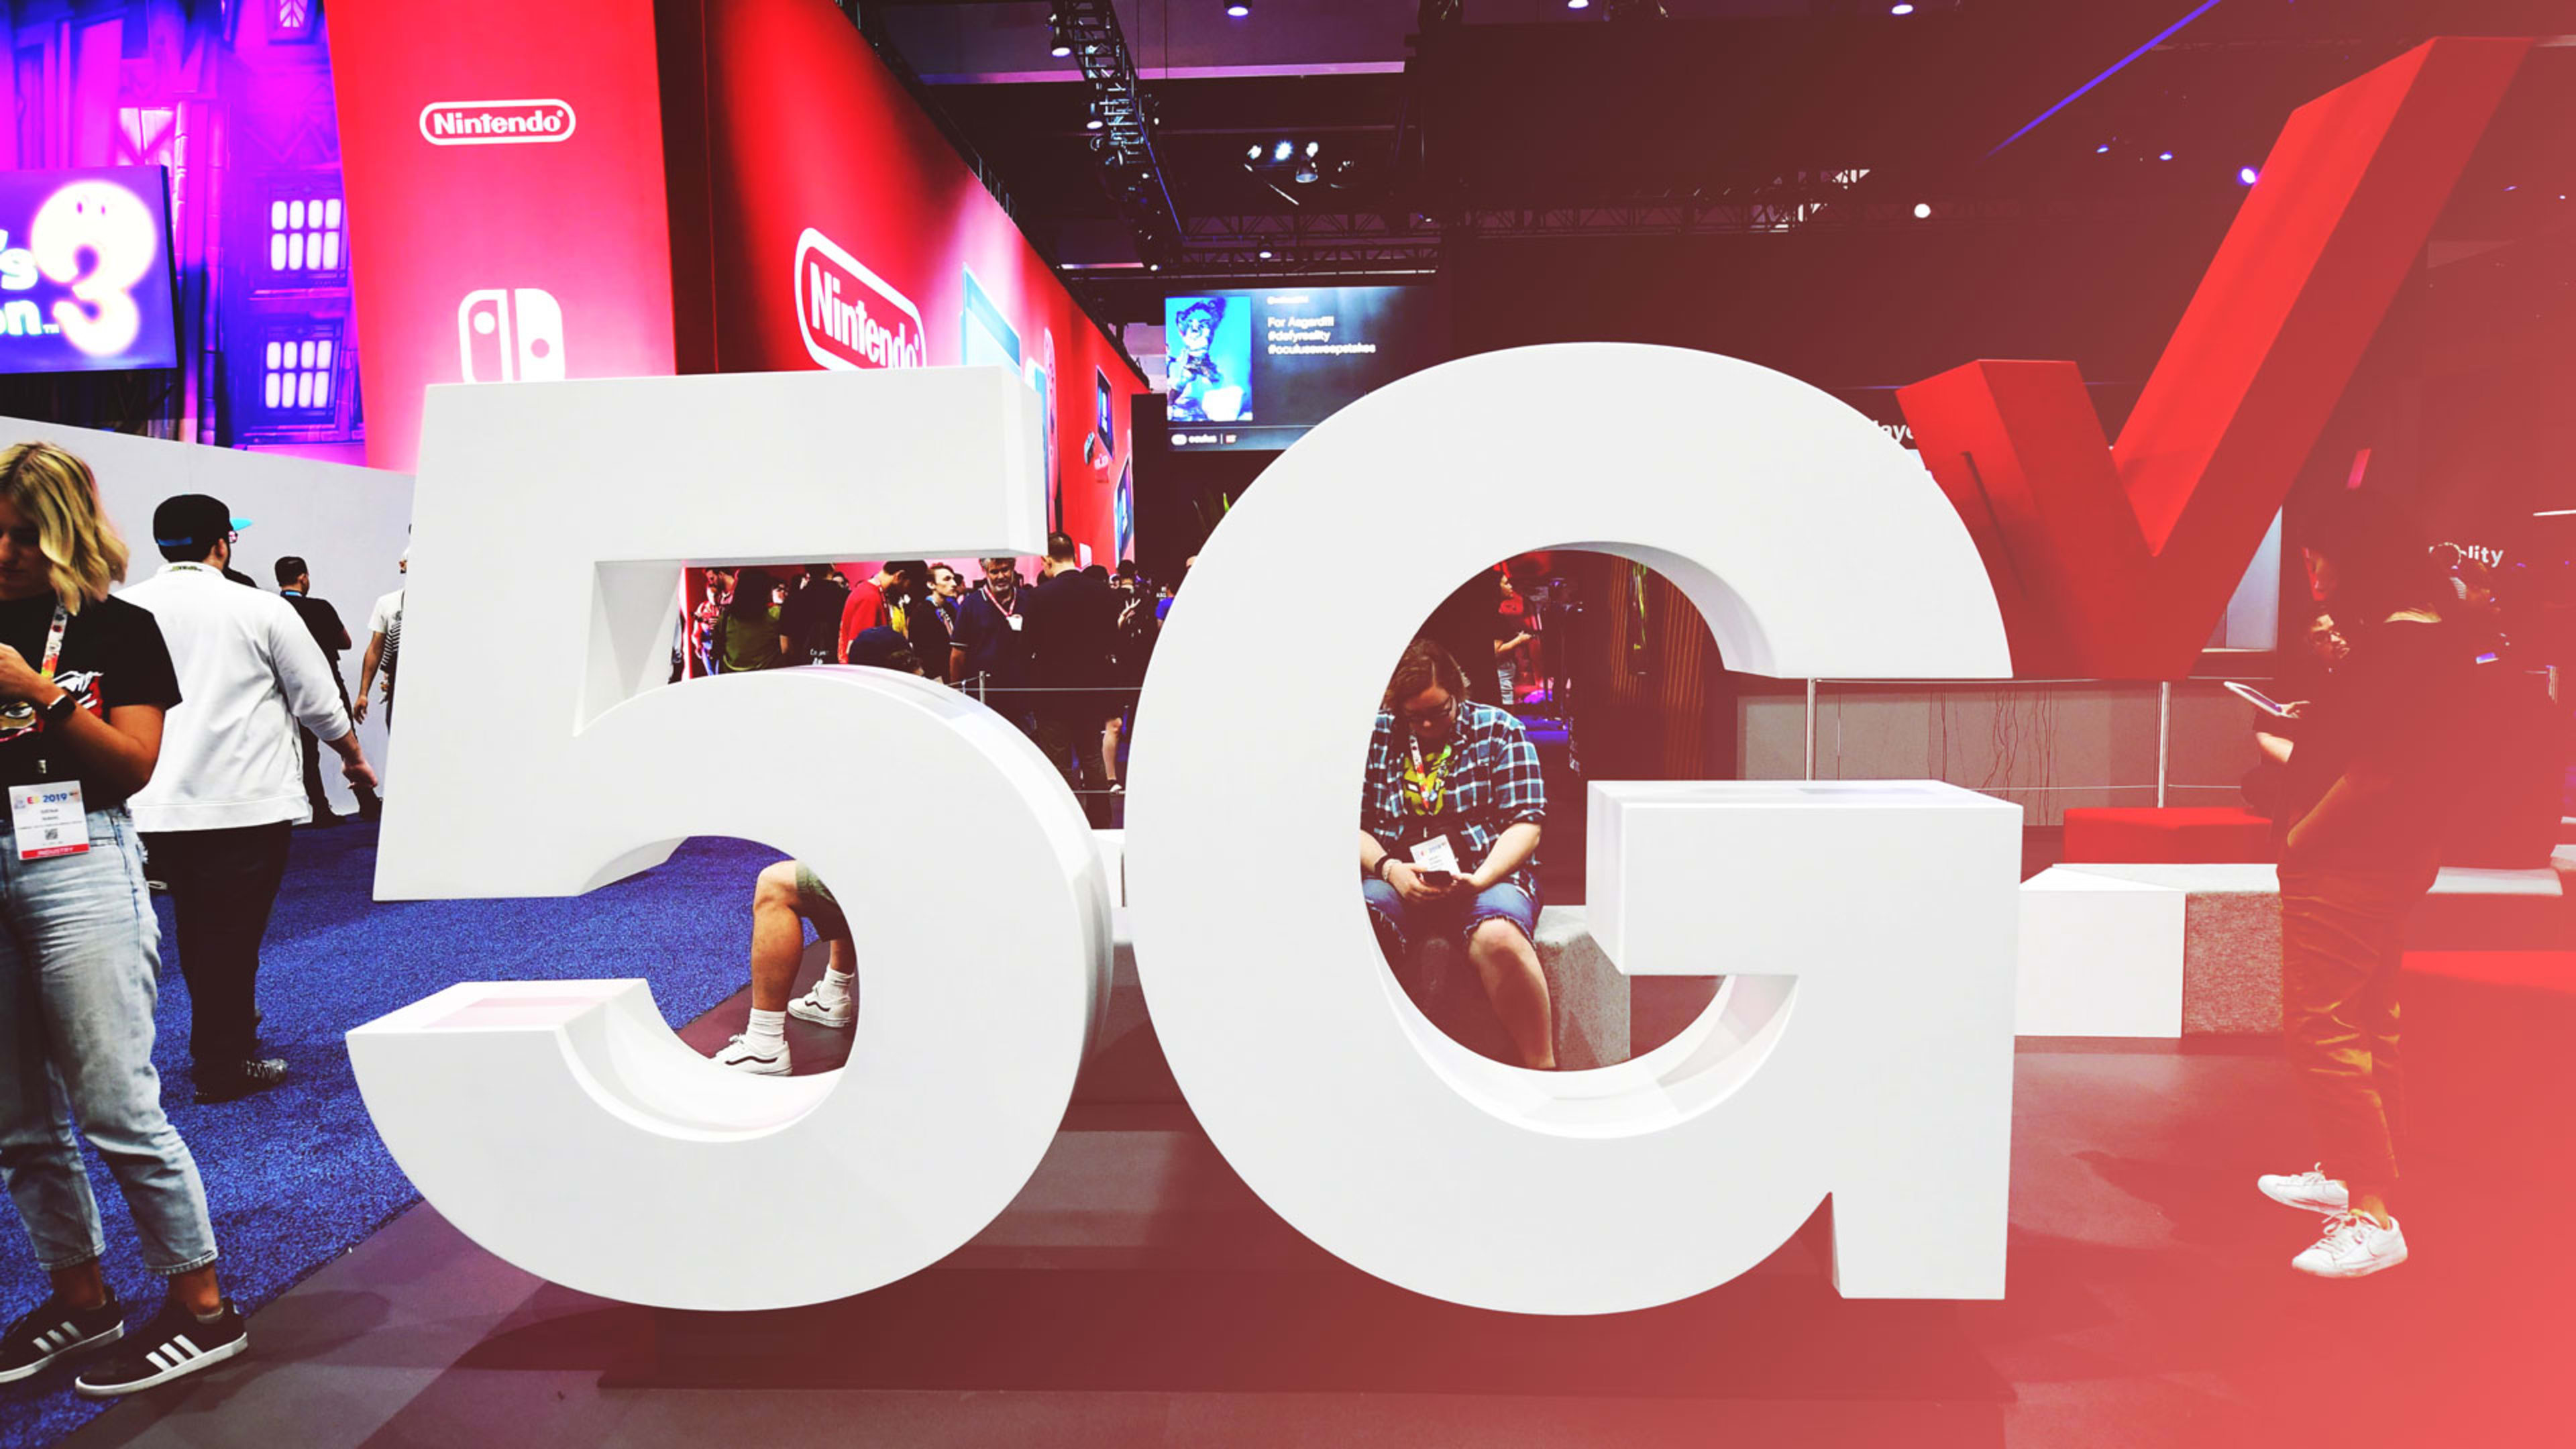 What will 5G mean for you? A reality check on the hype